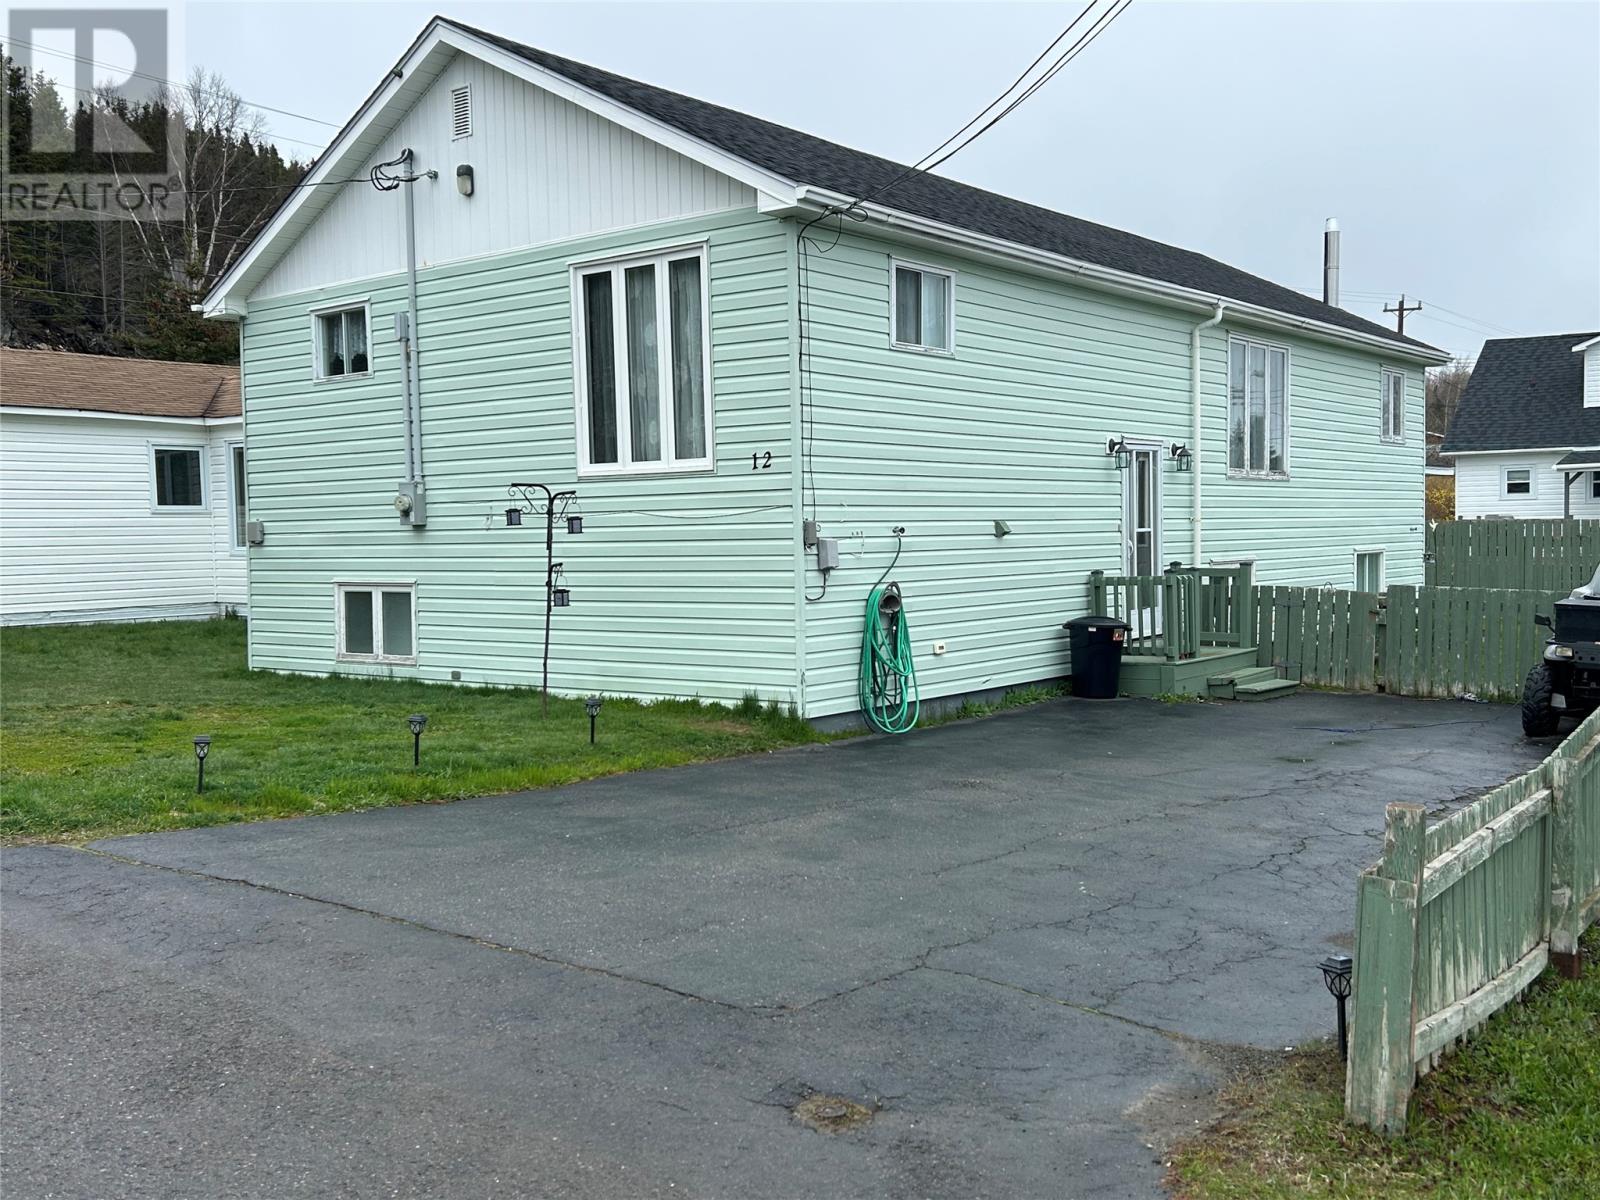 4 Bedroom Residential Home For Sale | 12 Joam Street | Lewisporte | A0G3A0